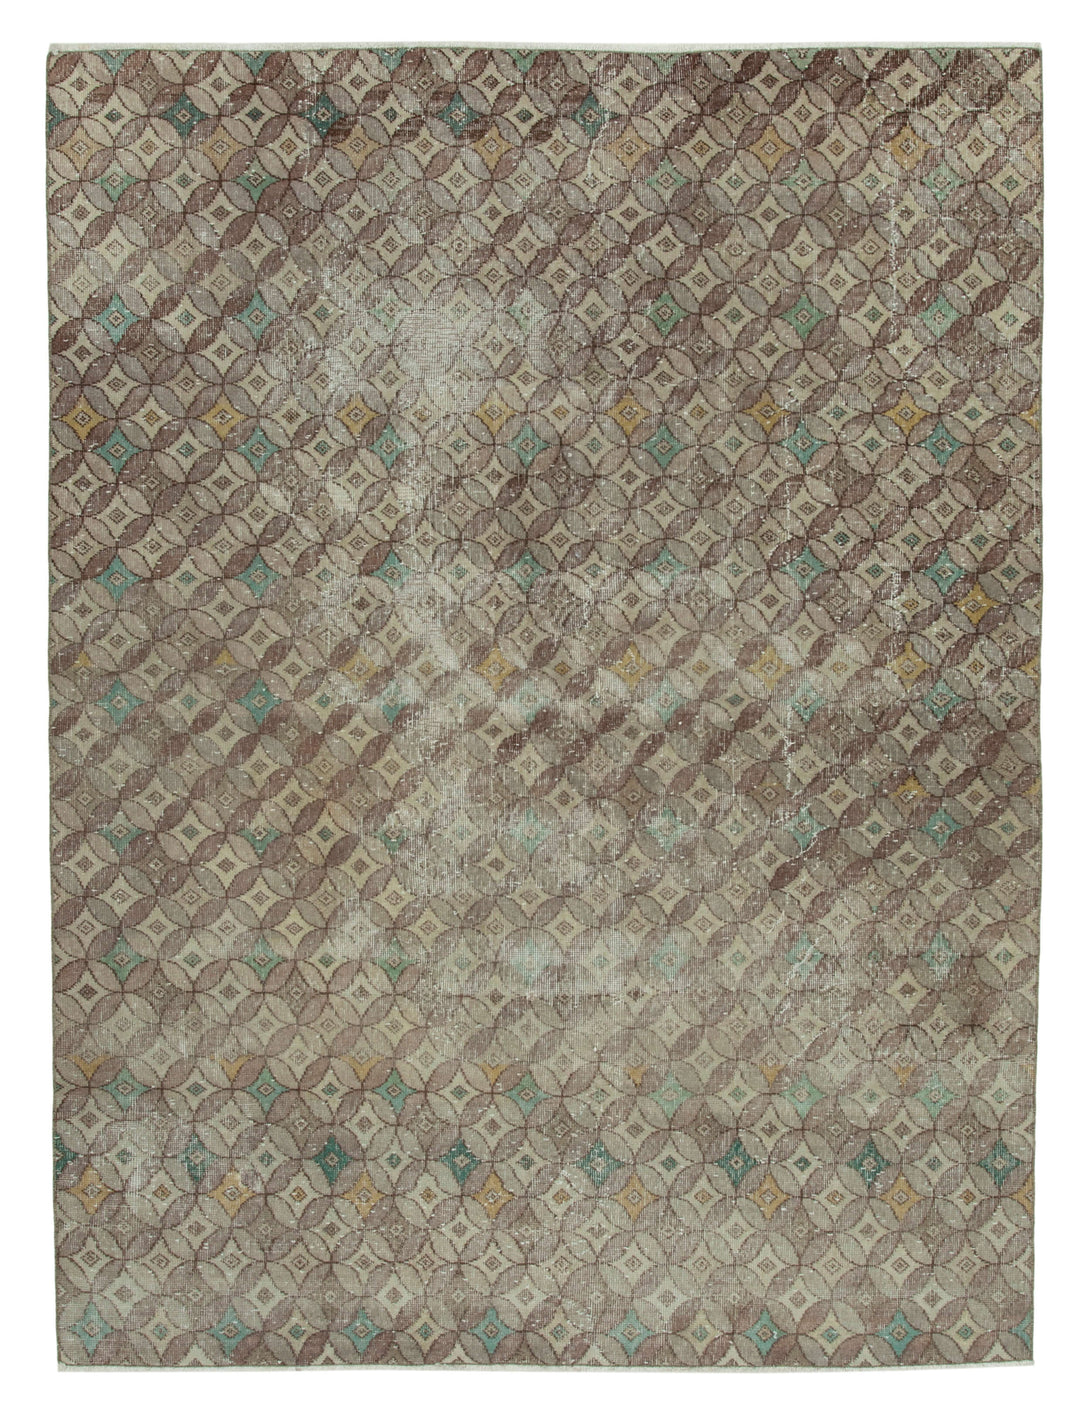 Handmade Geometric Area Rug > Design# OL-AC-33219 > Size: 6'-3" x 8'-5", Carpet Culture Rugs, Handmade Rugs, NYC Rugs, New Rugs, Shop Rugs, Rug Store, Outlet Rugs, SoHo Rugs, Rugs in USA